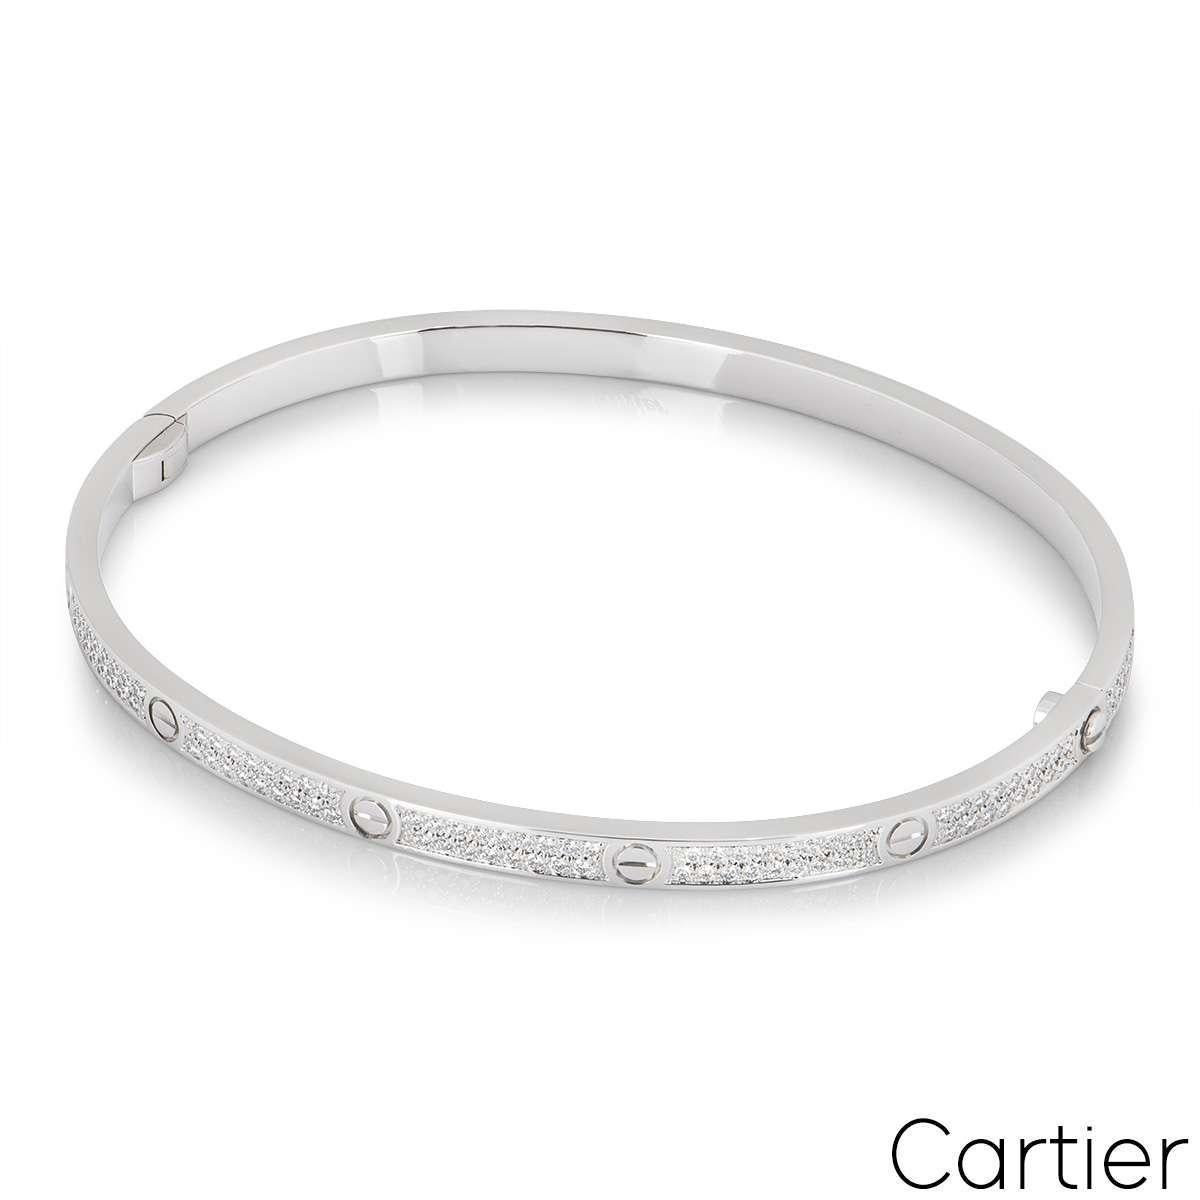 Cartier White Gold Pave Diamond SM Love Bracelet Size 19 N6710819 In Excellent Condition For Sale In London, GB